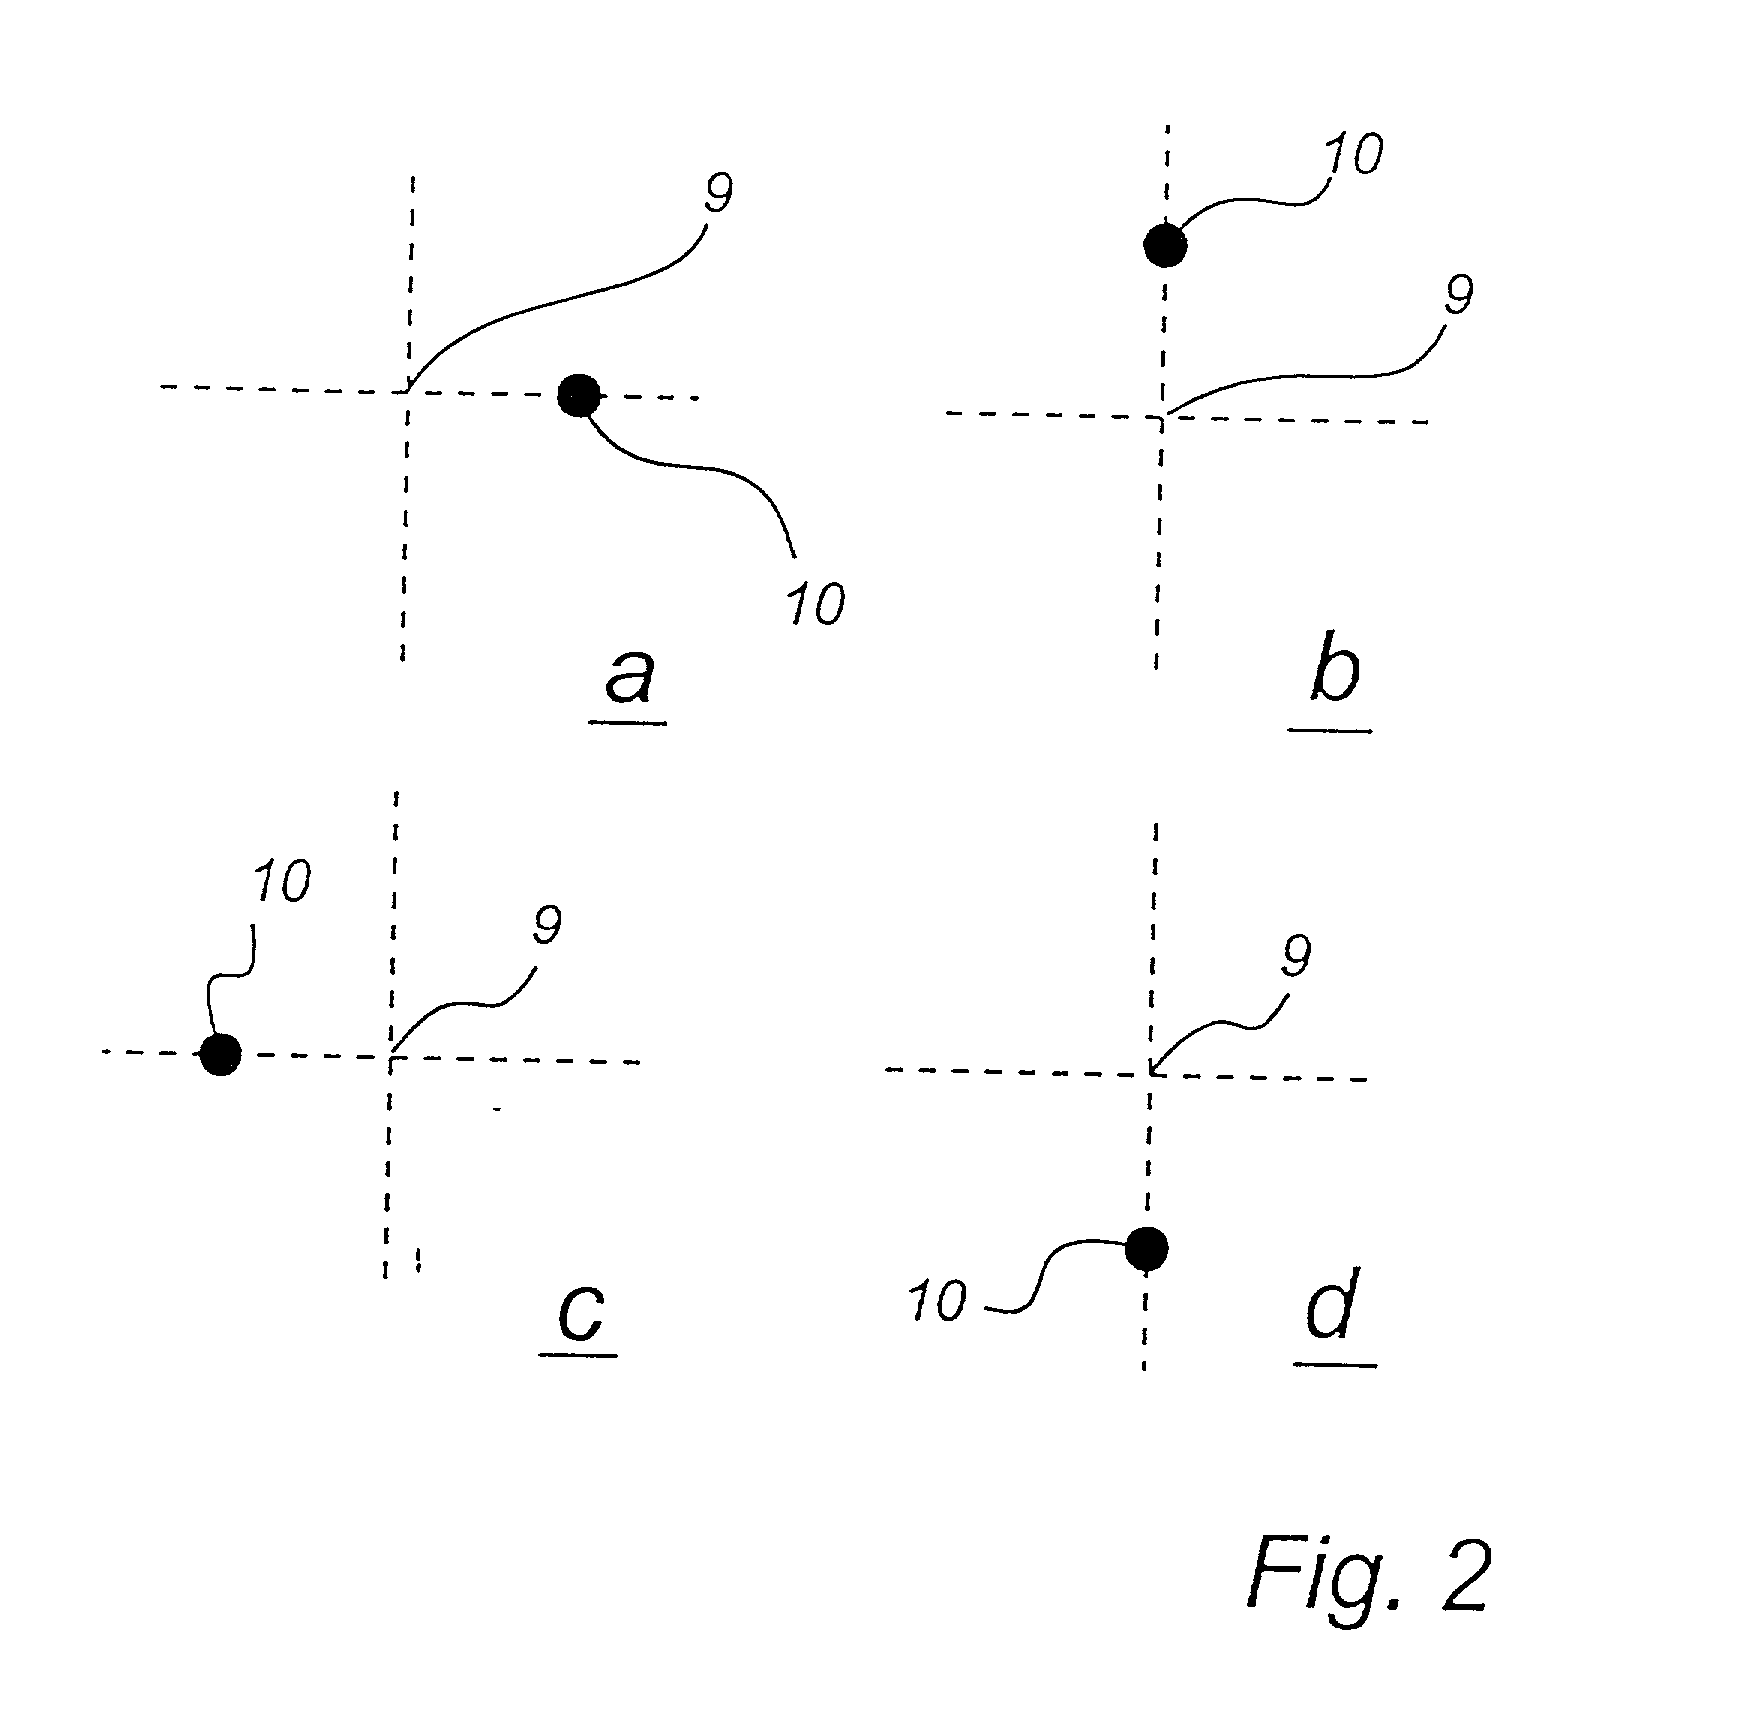 System and method for guiding a vehicle